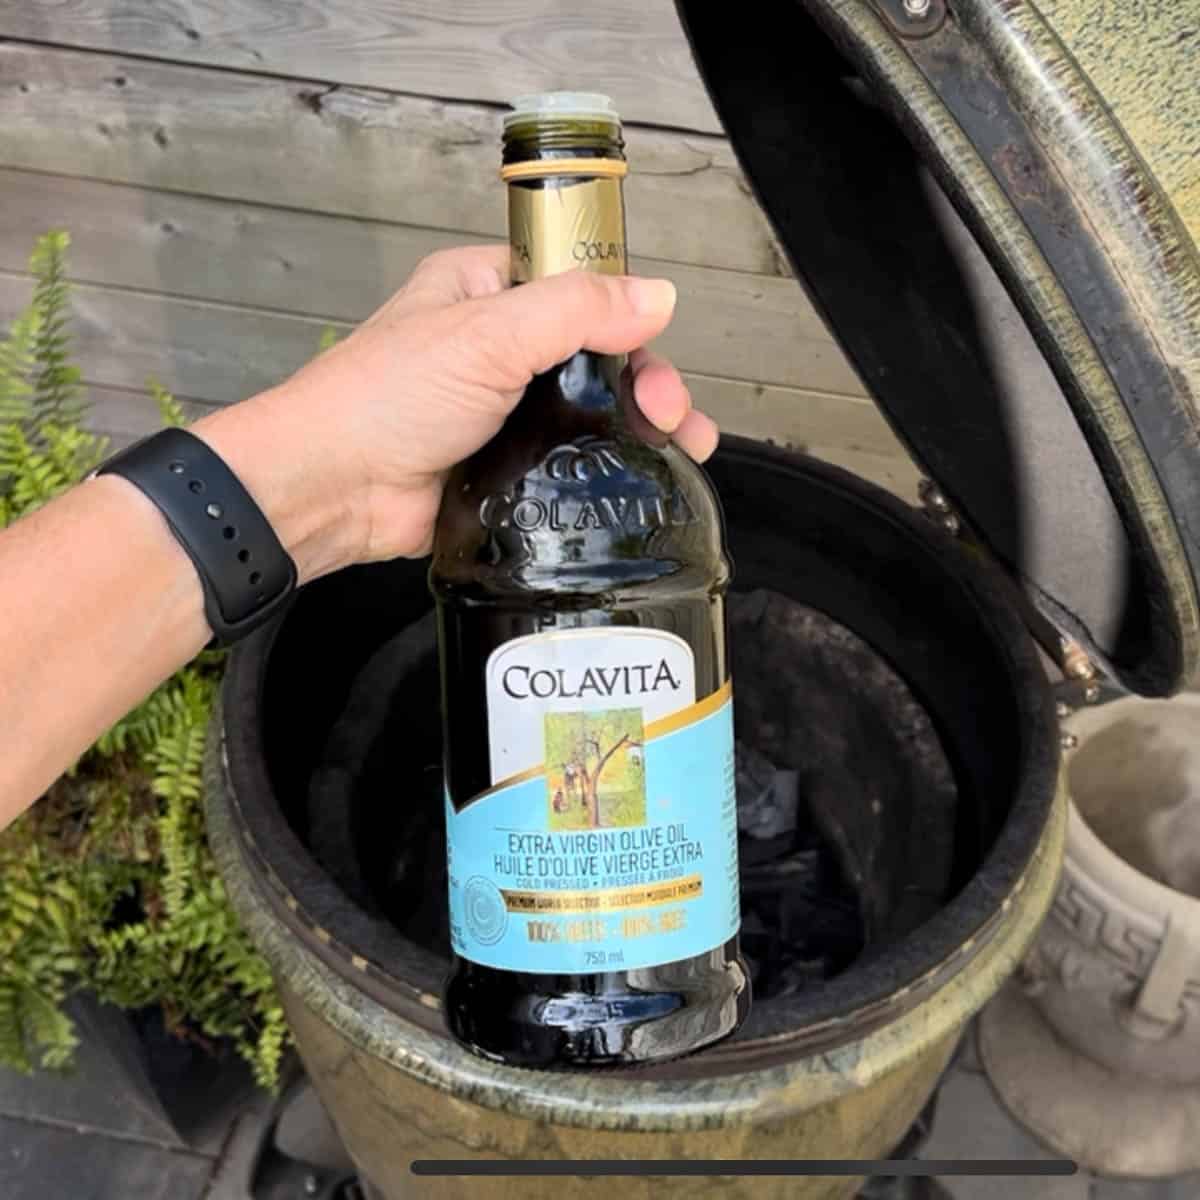 Bottle of olive oil held up in front of bayou classic smoker.